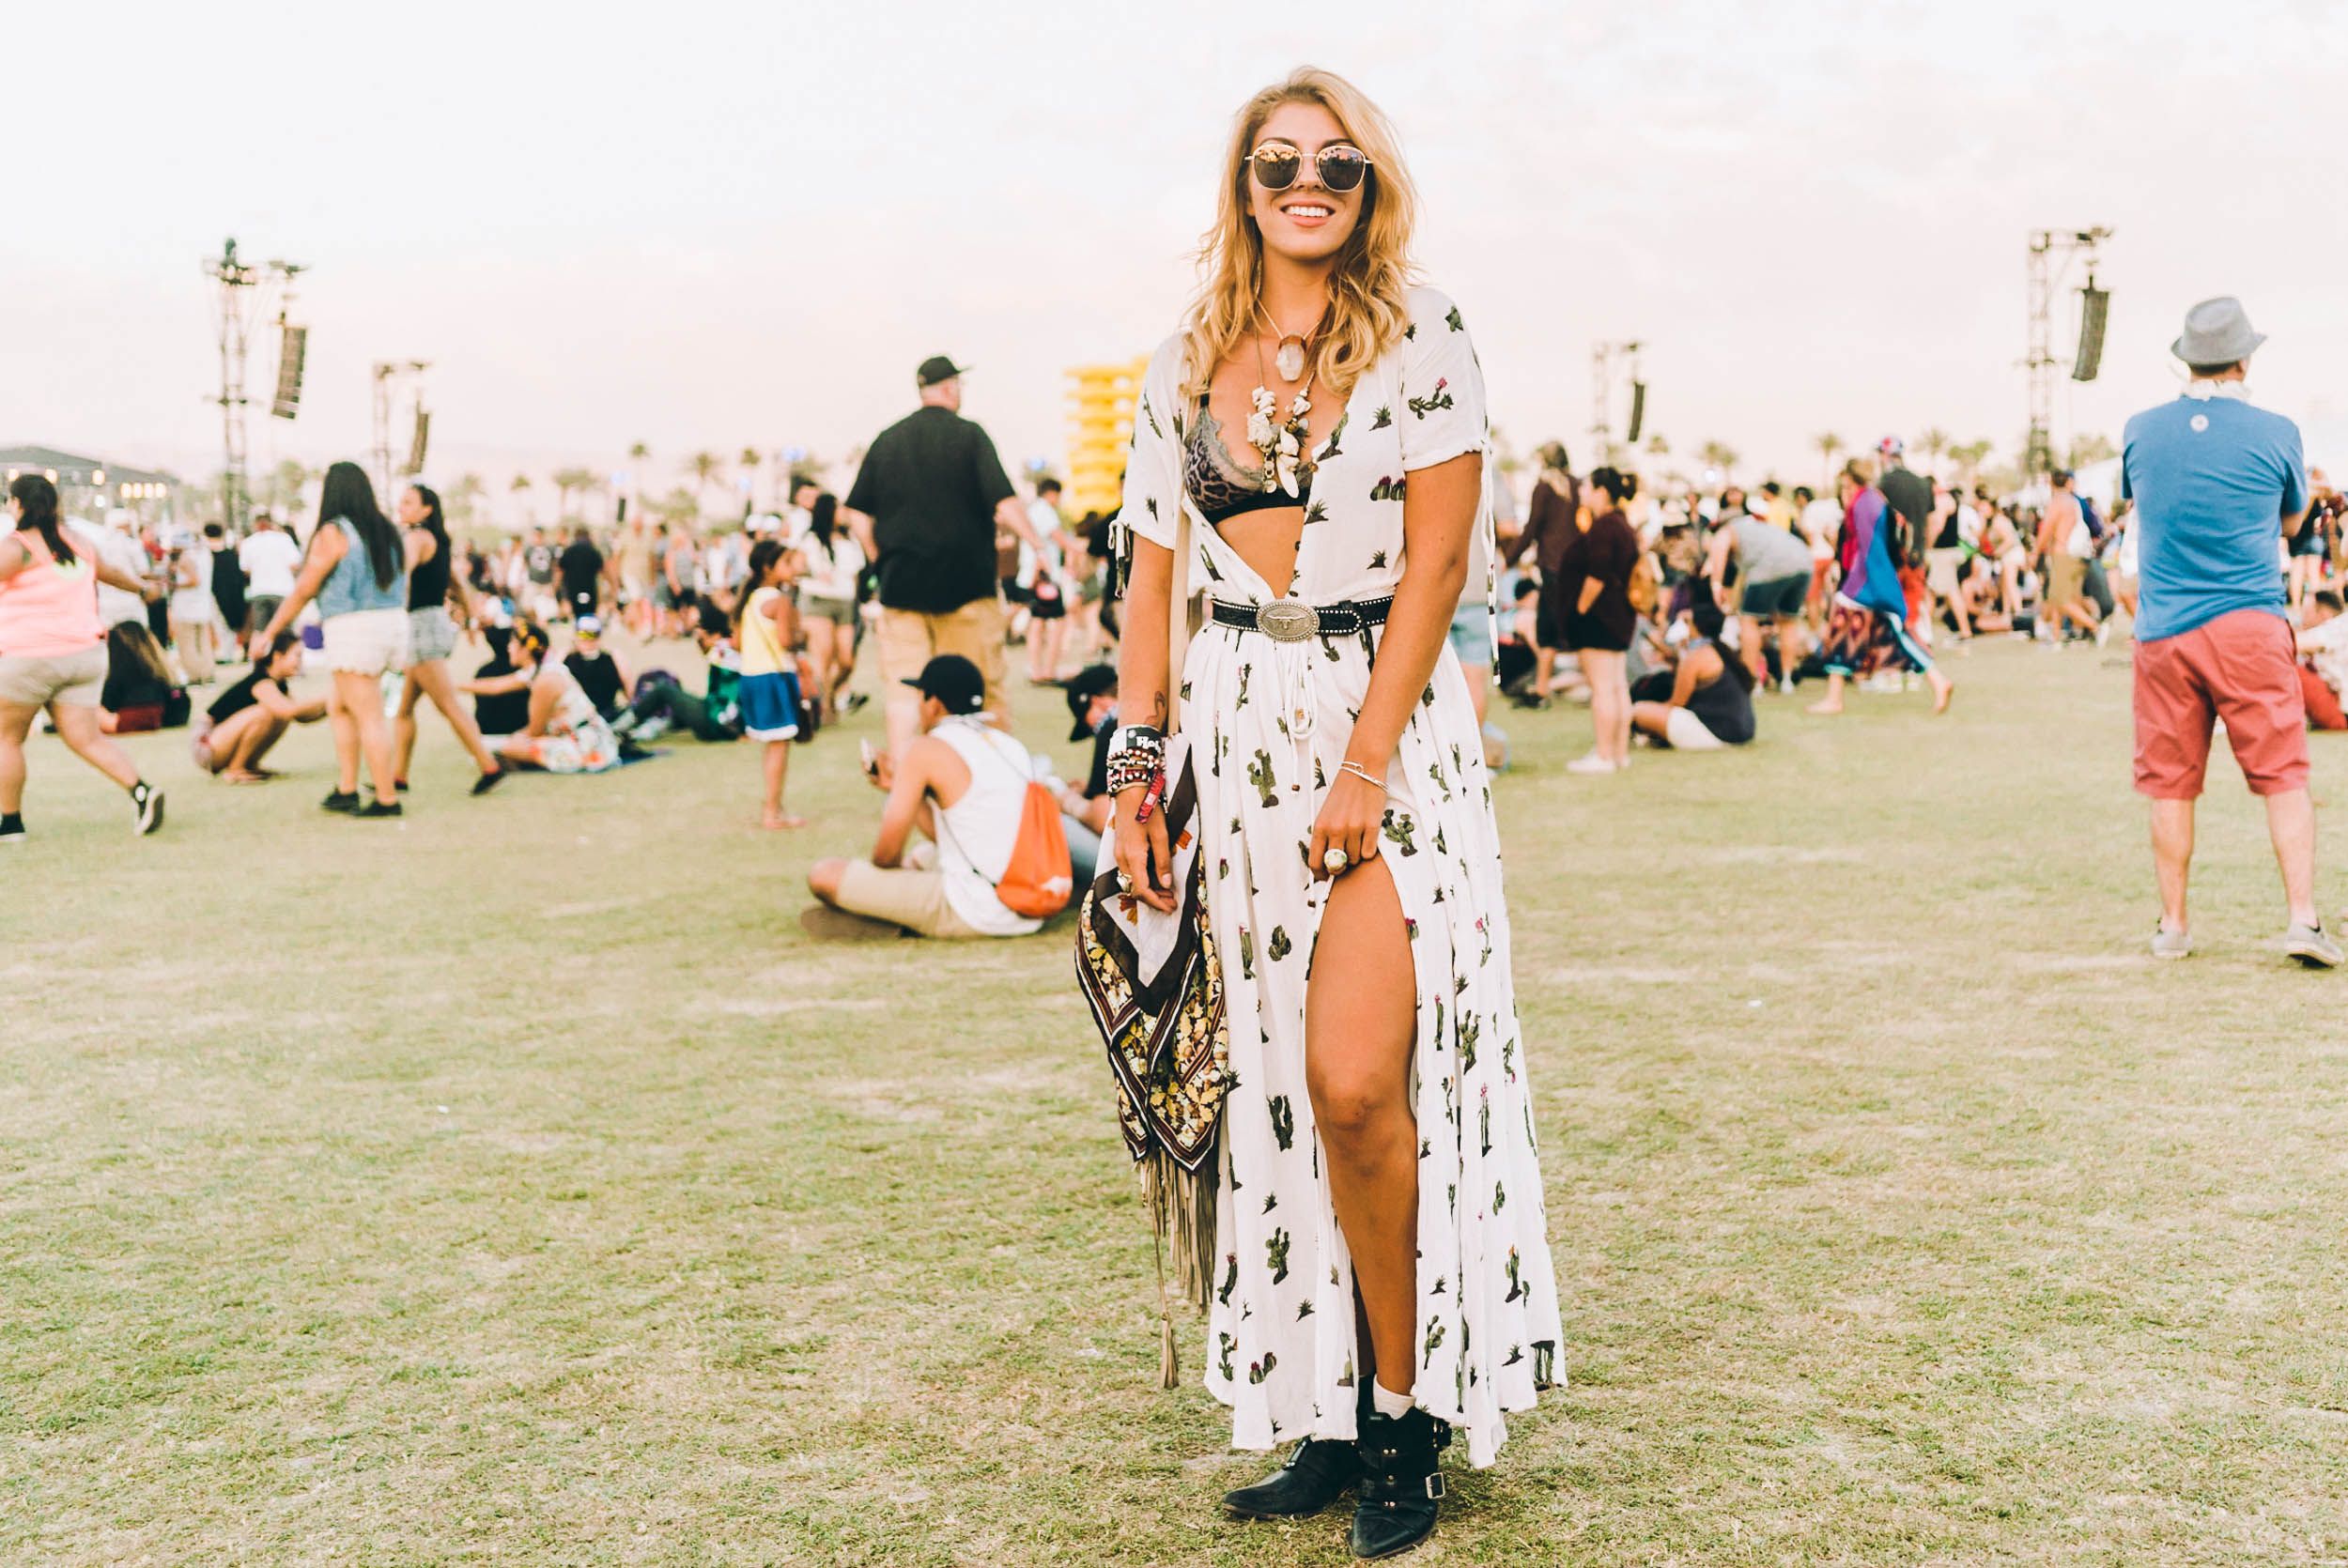 Best Coachella Outfits of 2016 - Street Style and Festival Fashion From  Coachella Music Festival